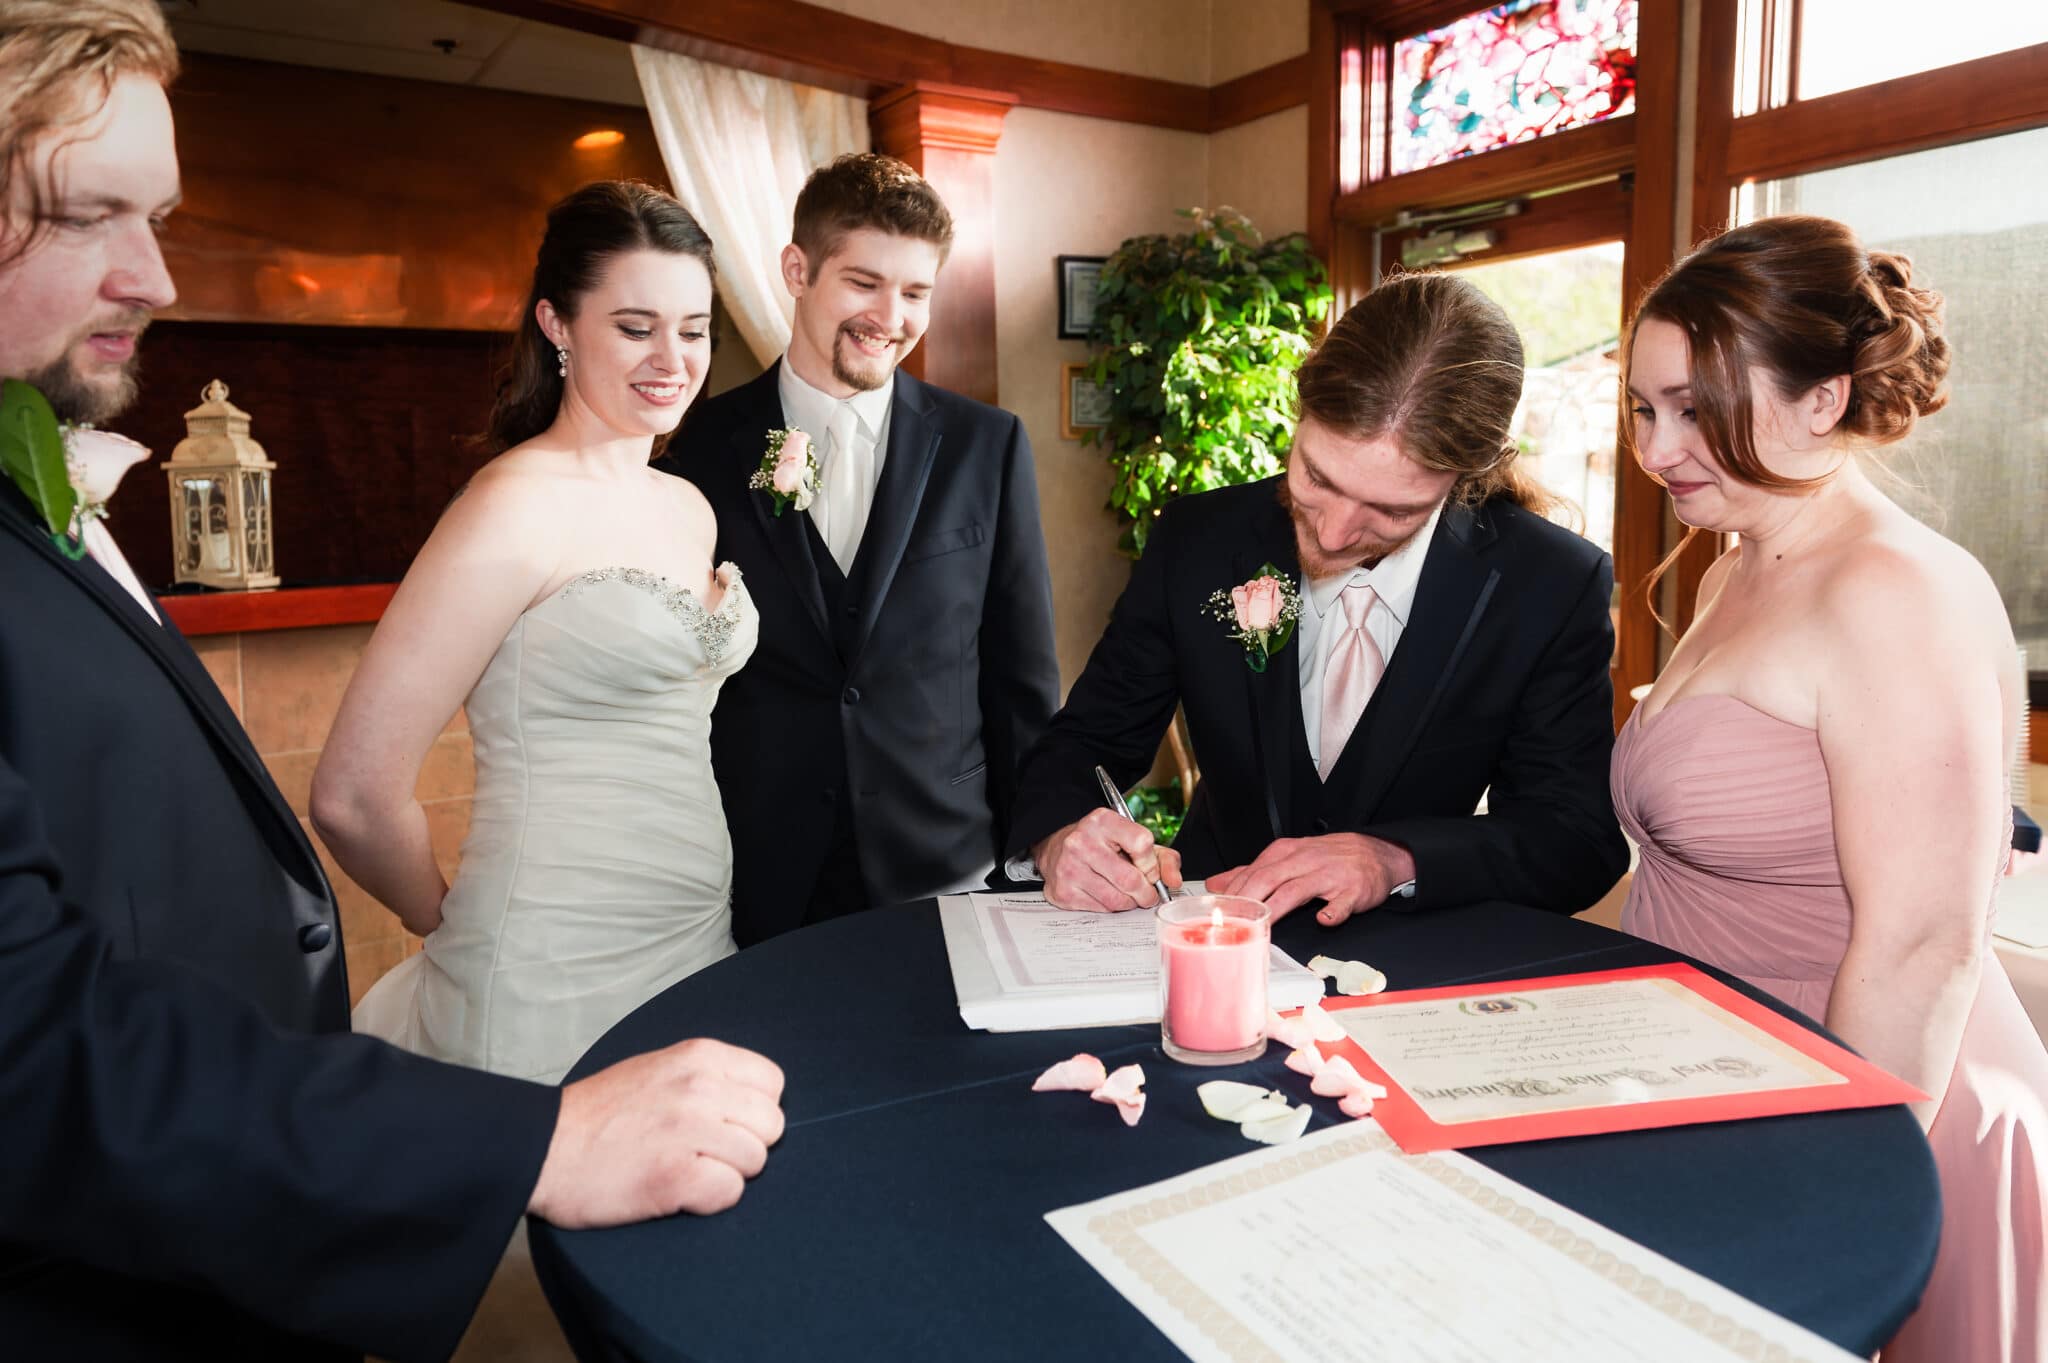 A recently married couple, the officiant and the matron of honor watch as the best man signs his name to witness the event on the marriage license.